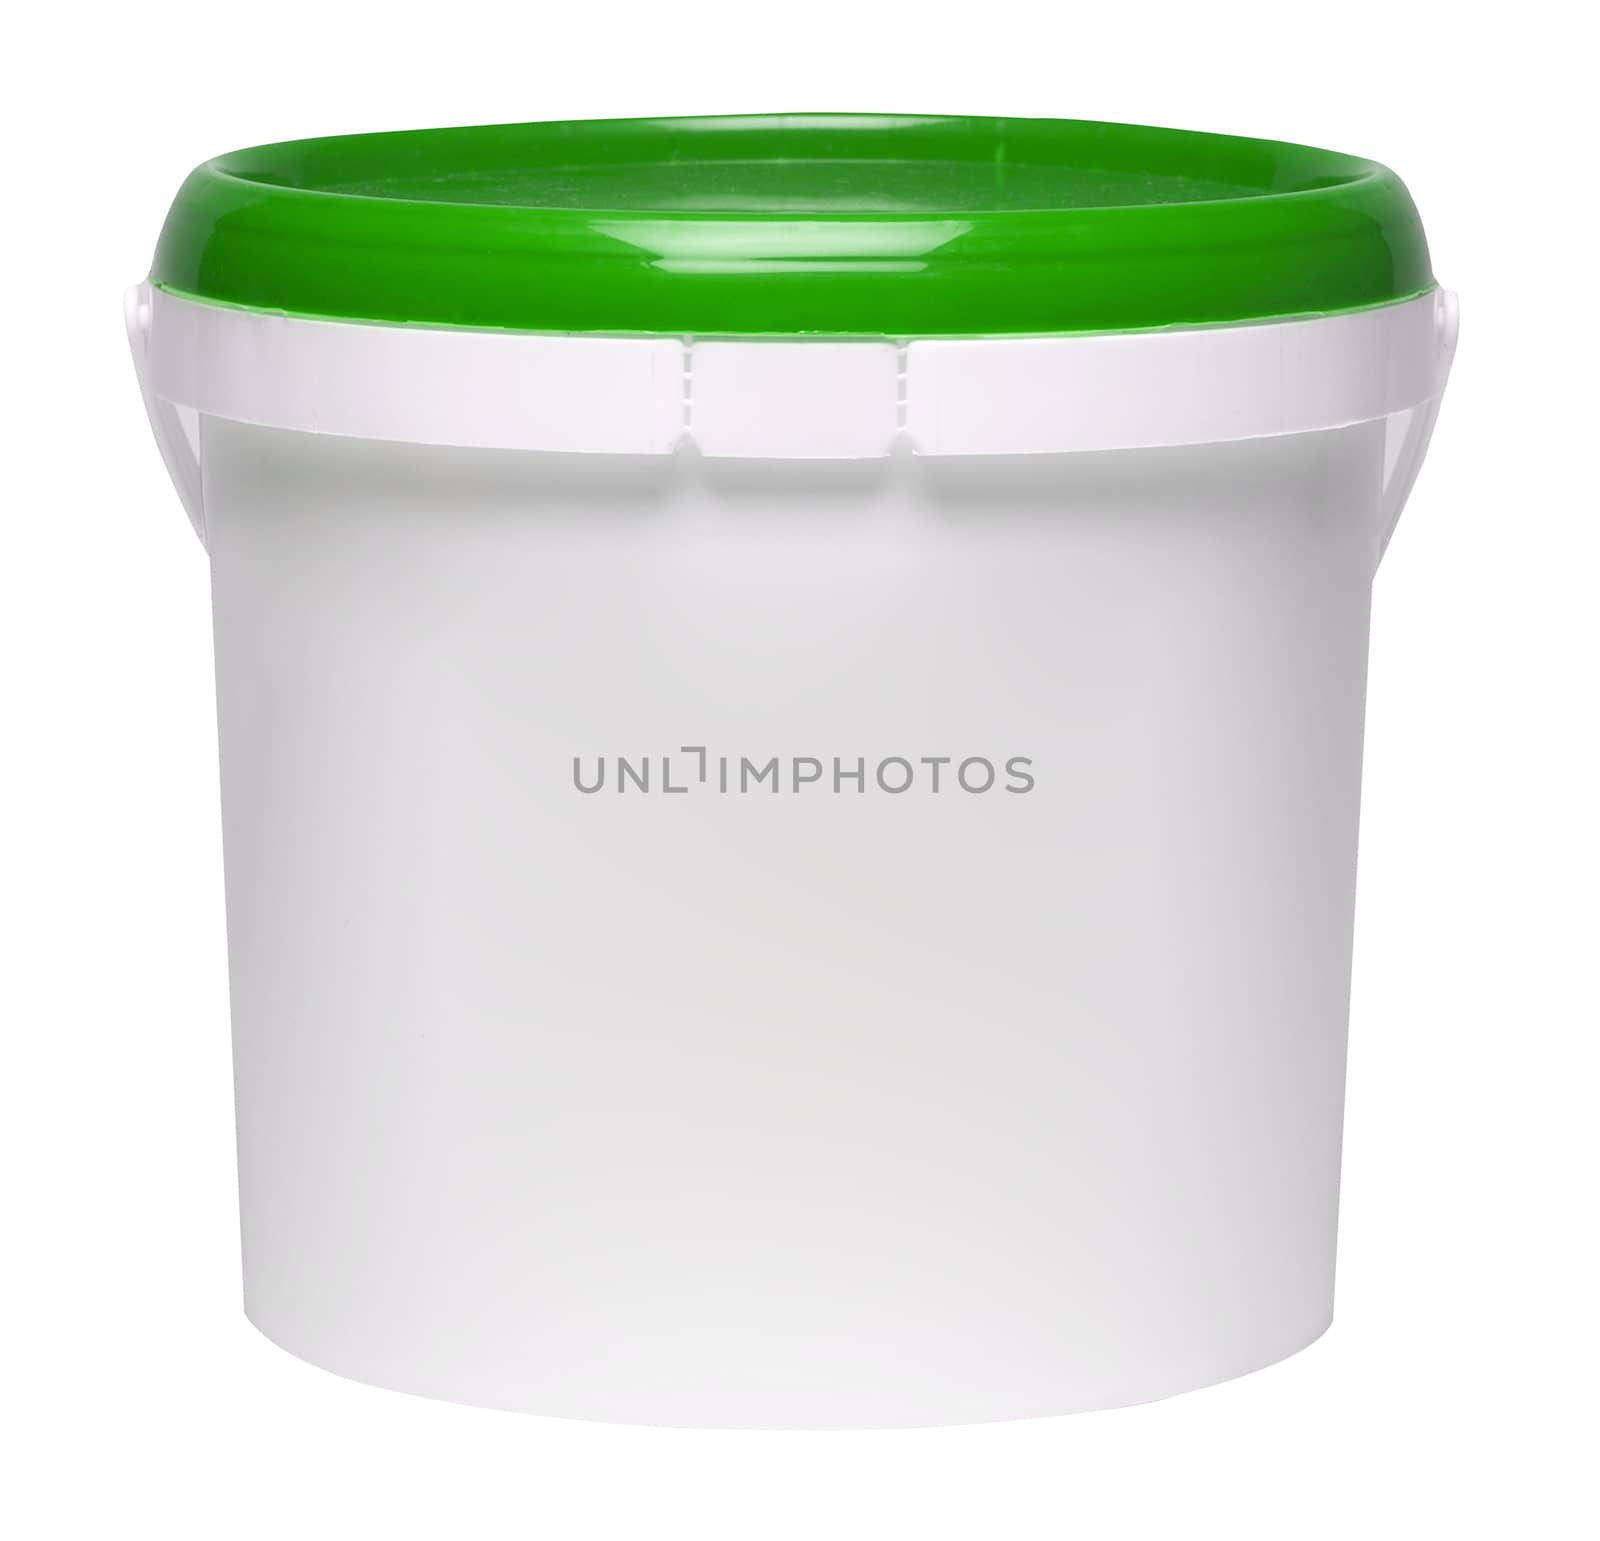 Plastic container on white background by ozaiachin